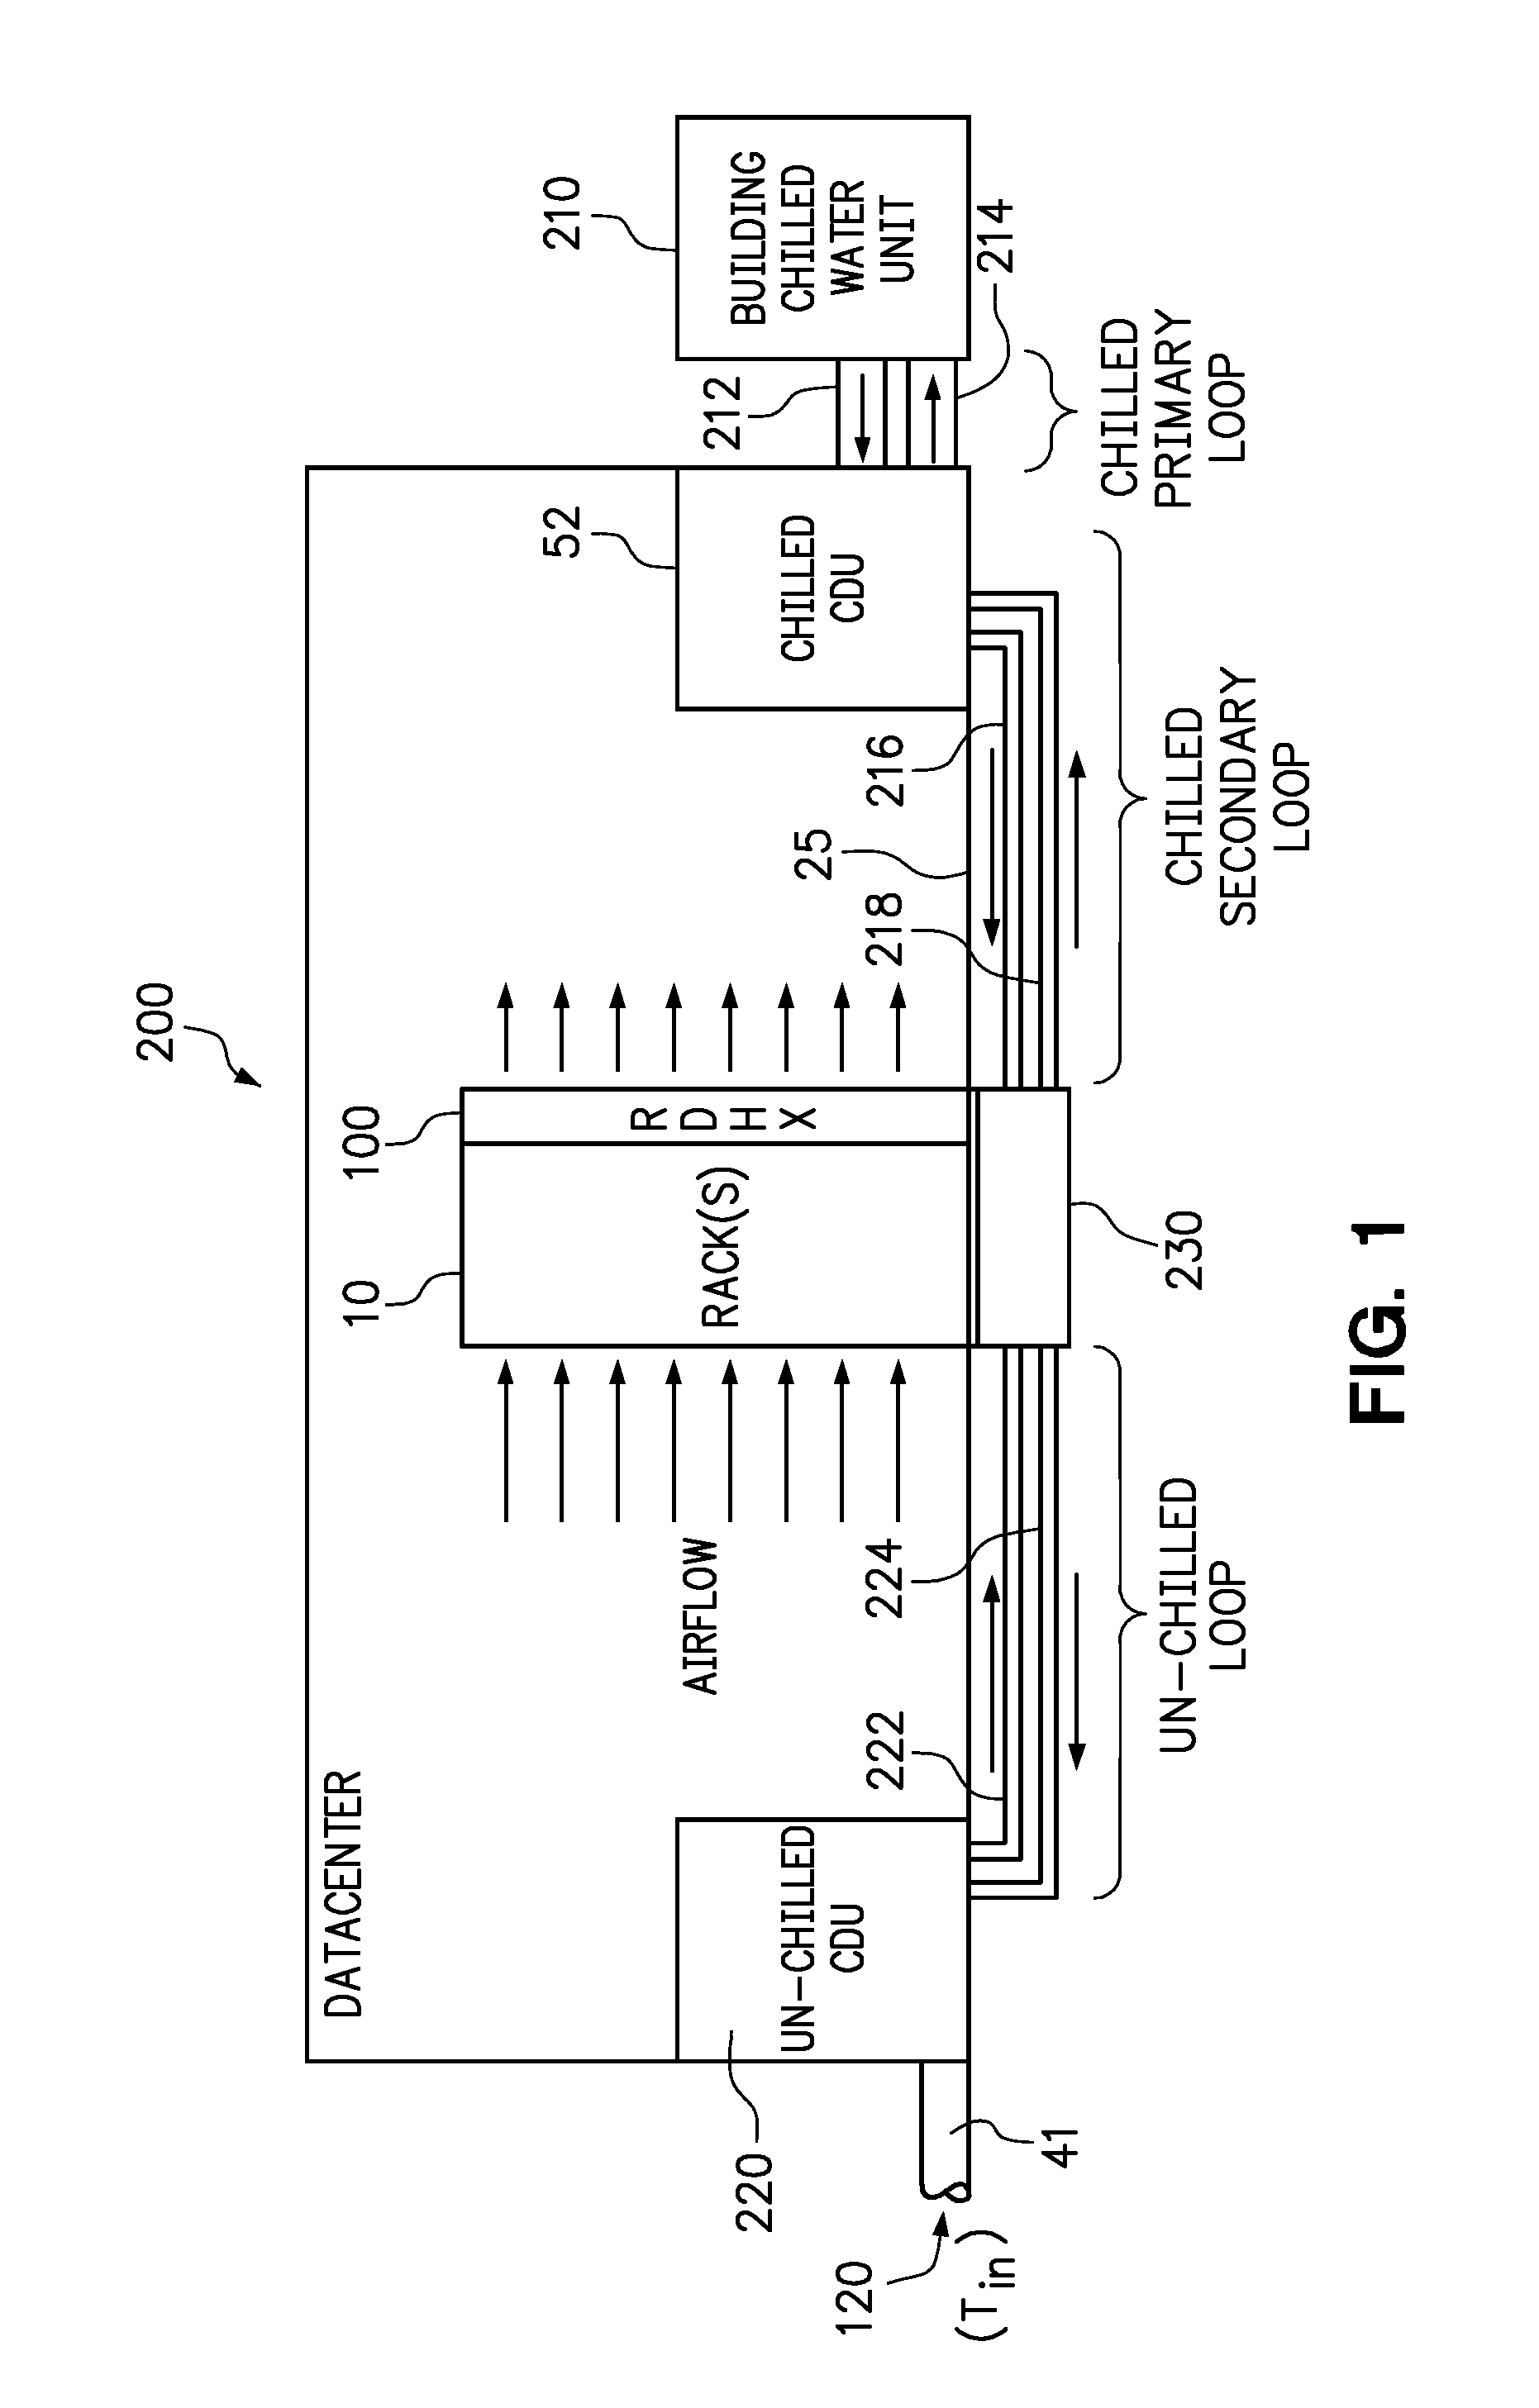 Computer rack cooling using independently-controlled flow of coolants through a dual-section heat exchanger